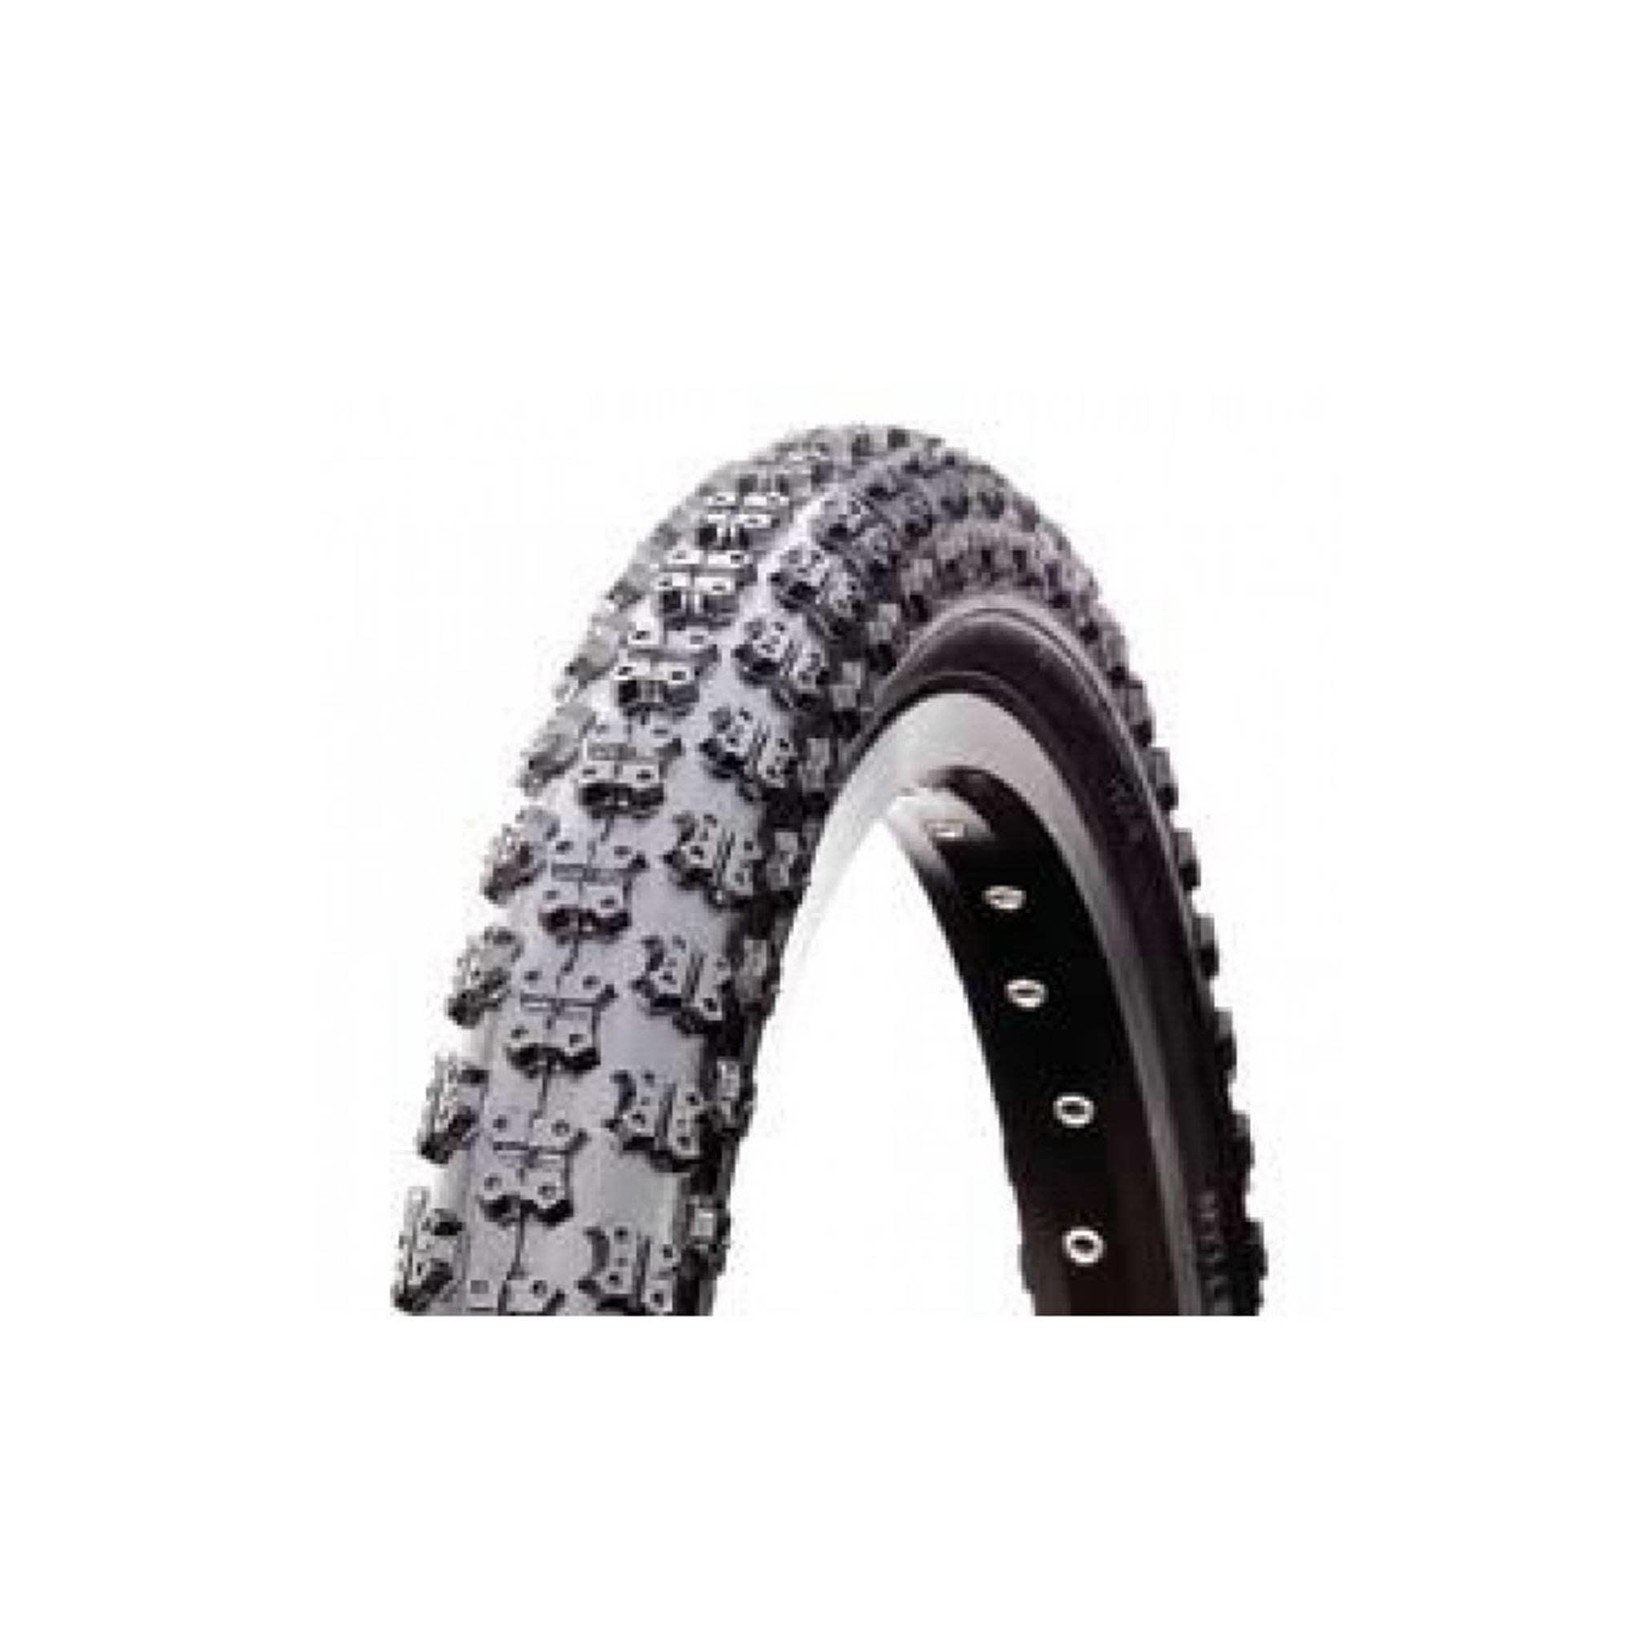 Chaoyang 12 1/2 x 2 1/4 Knobbly Tyre